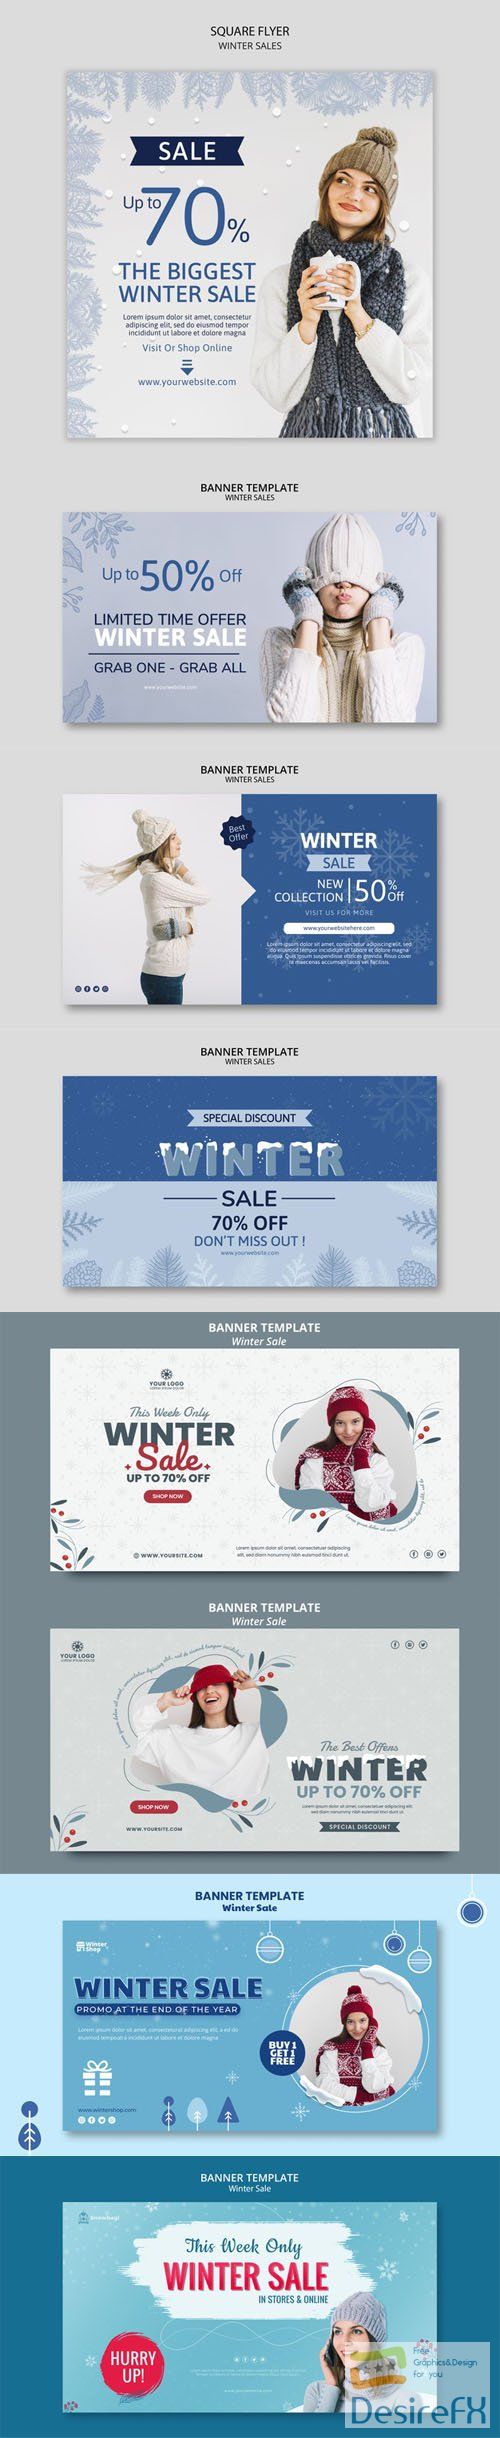 8 Winter Sales Banners PSD Templates Collection